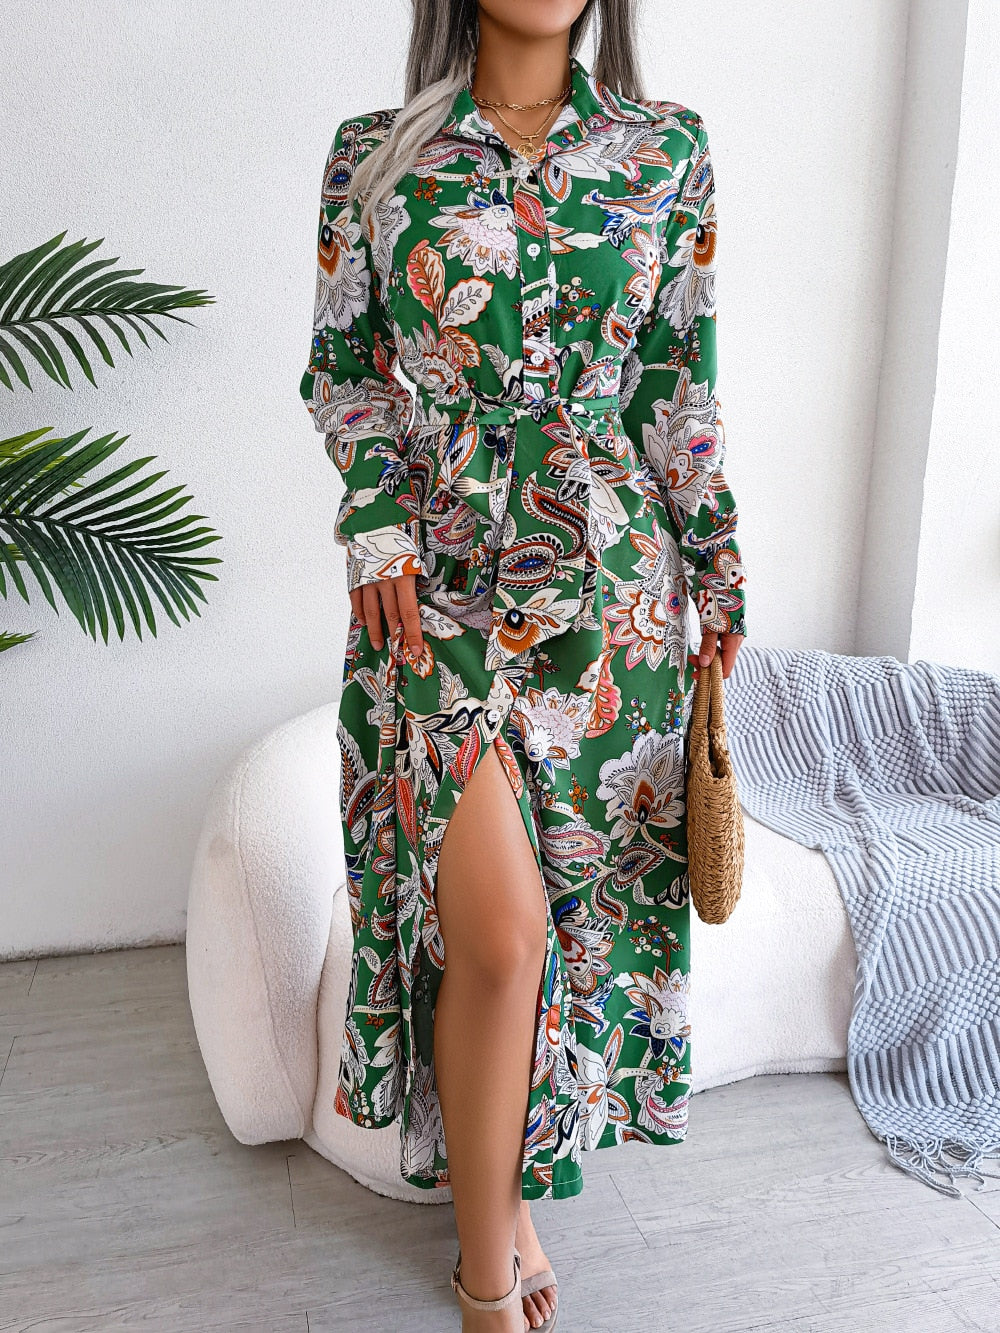 Spring Summer Retro Floral Collar Long Sleeve Tie Up Shirt Dress For Ladies Fashion All Match Print Dresses The Clothing Company Sydney